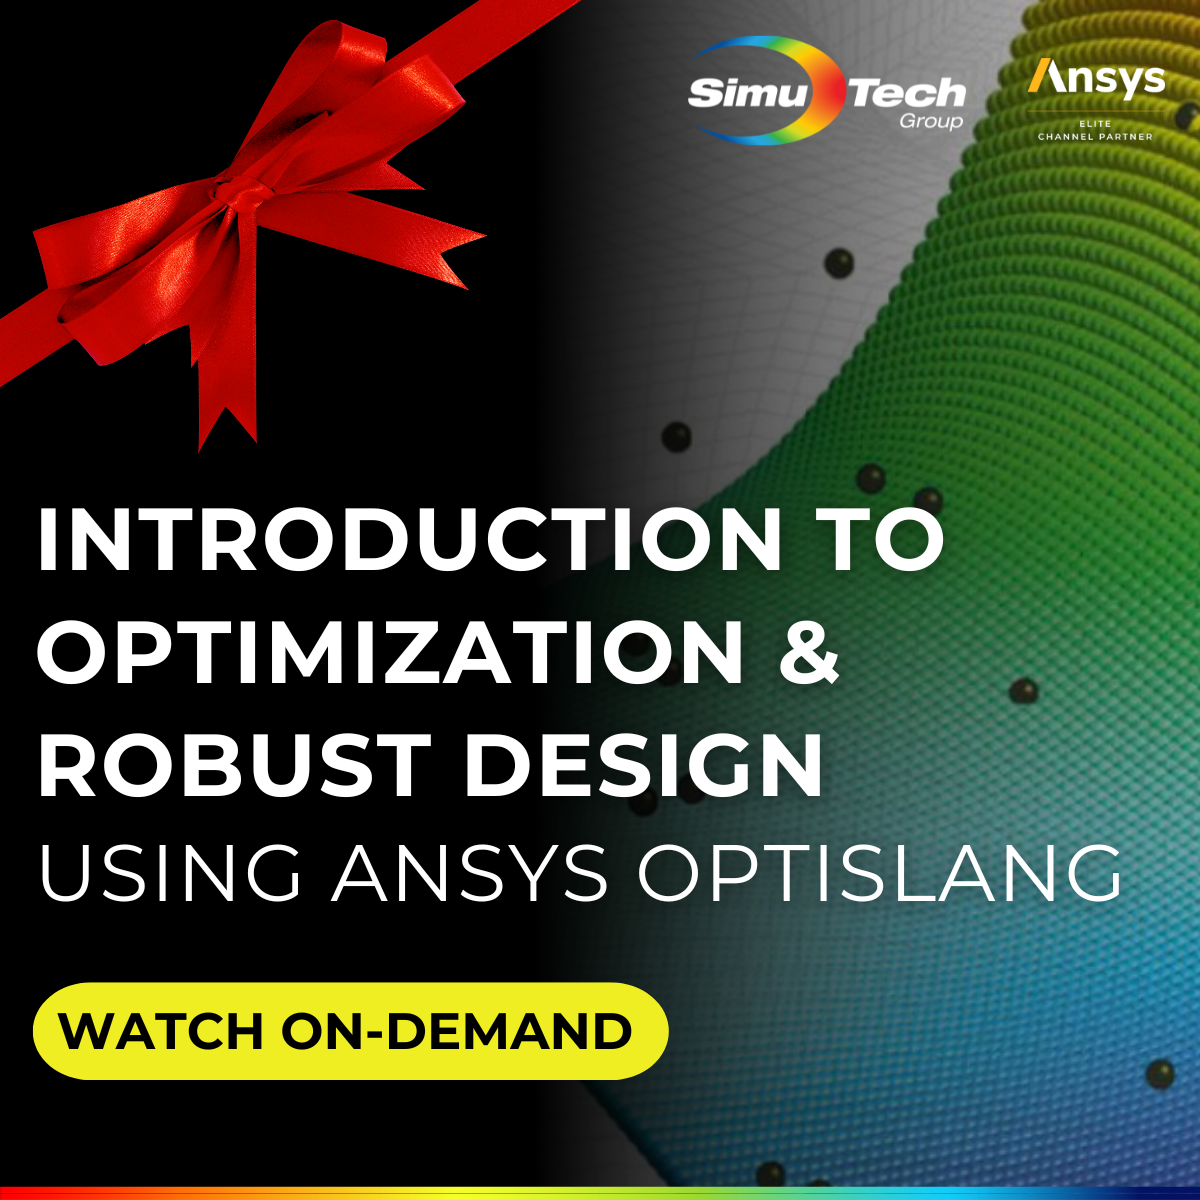 IMAGE: Introduction to Optimization and Robust Design using Ansys OptiSLang